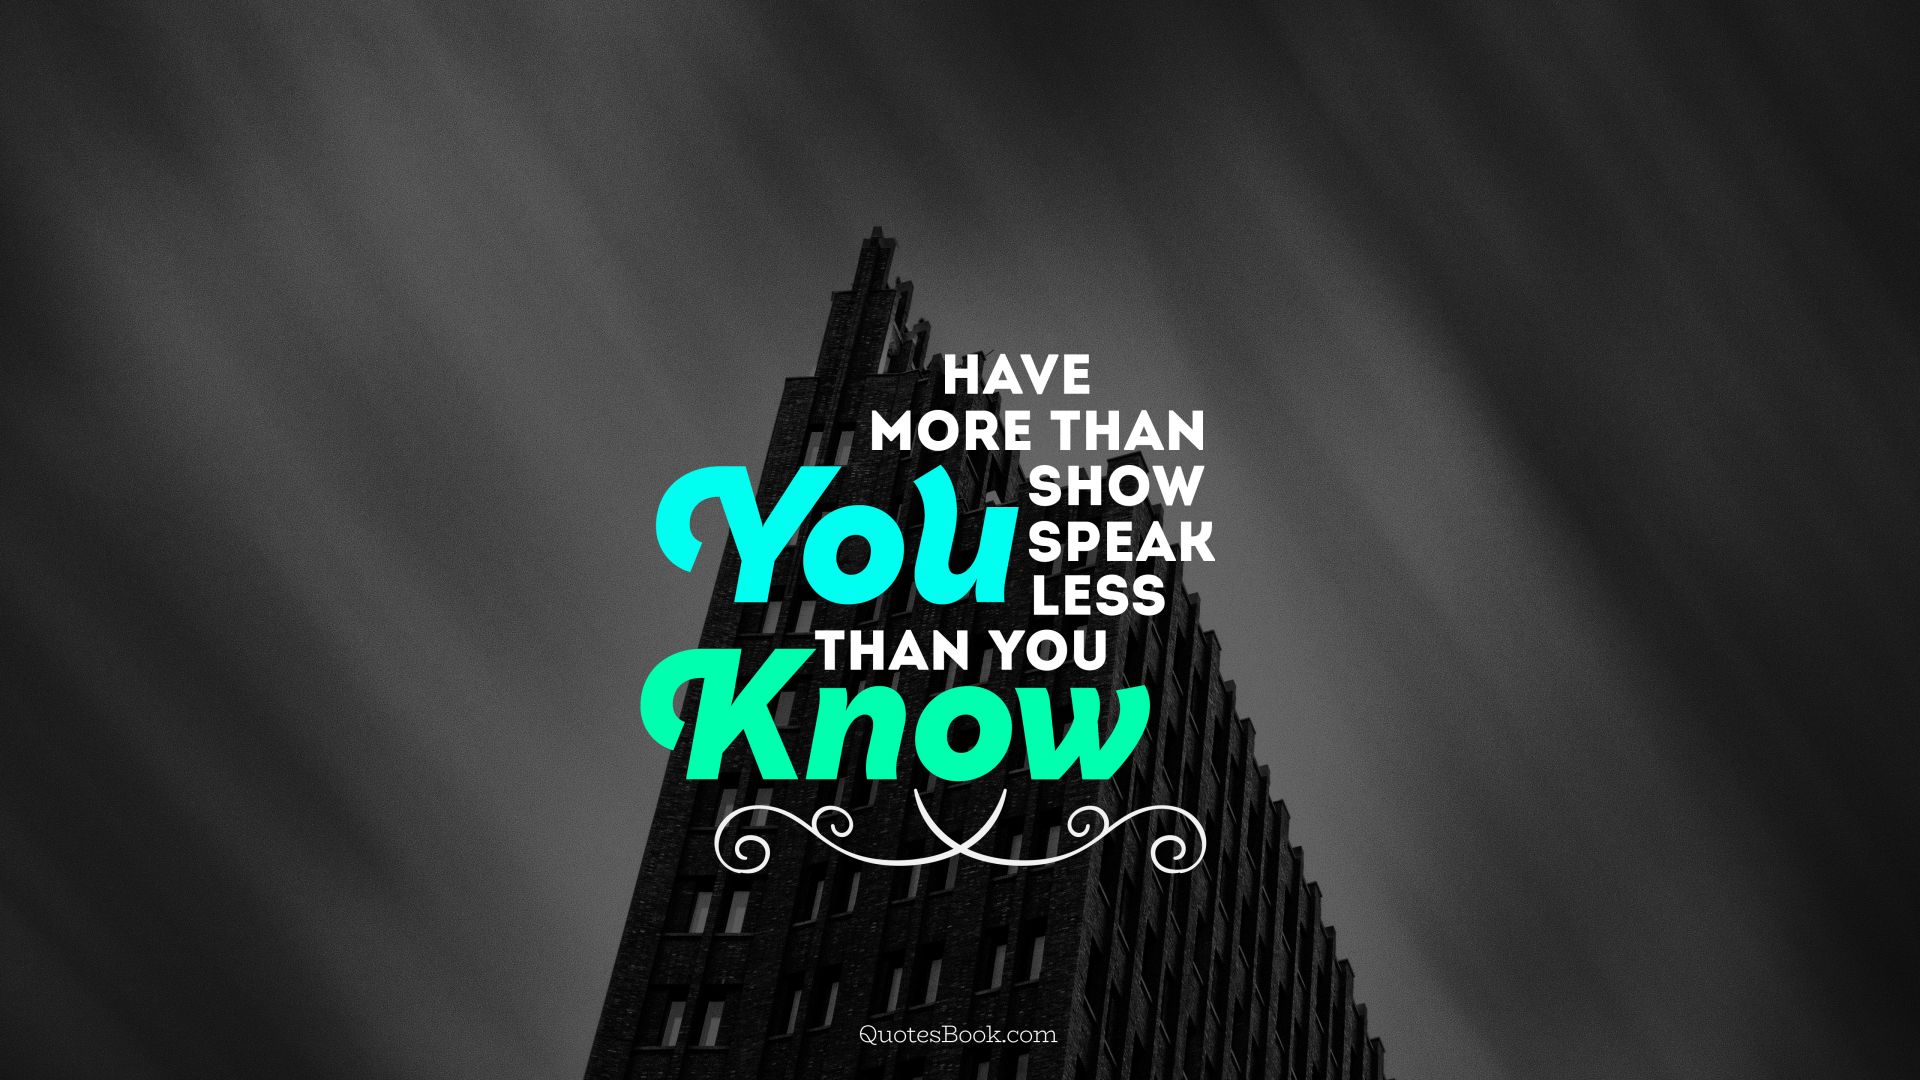 Have more than you show speak less than you know